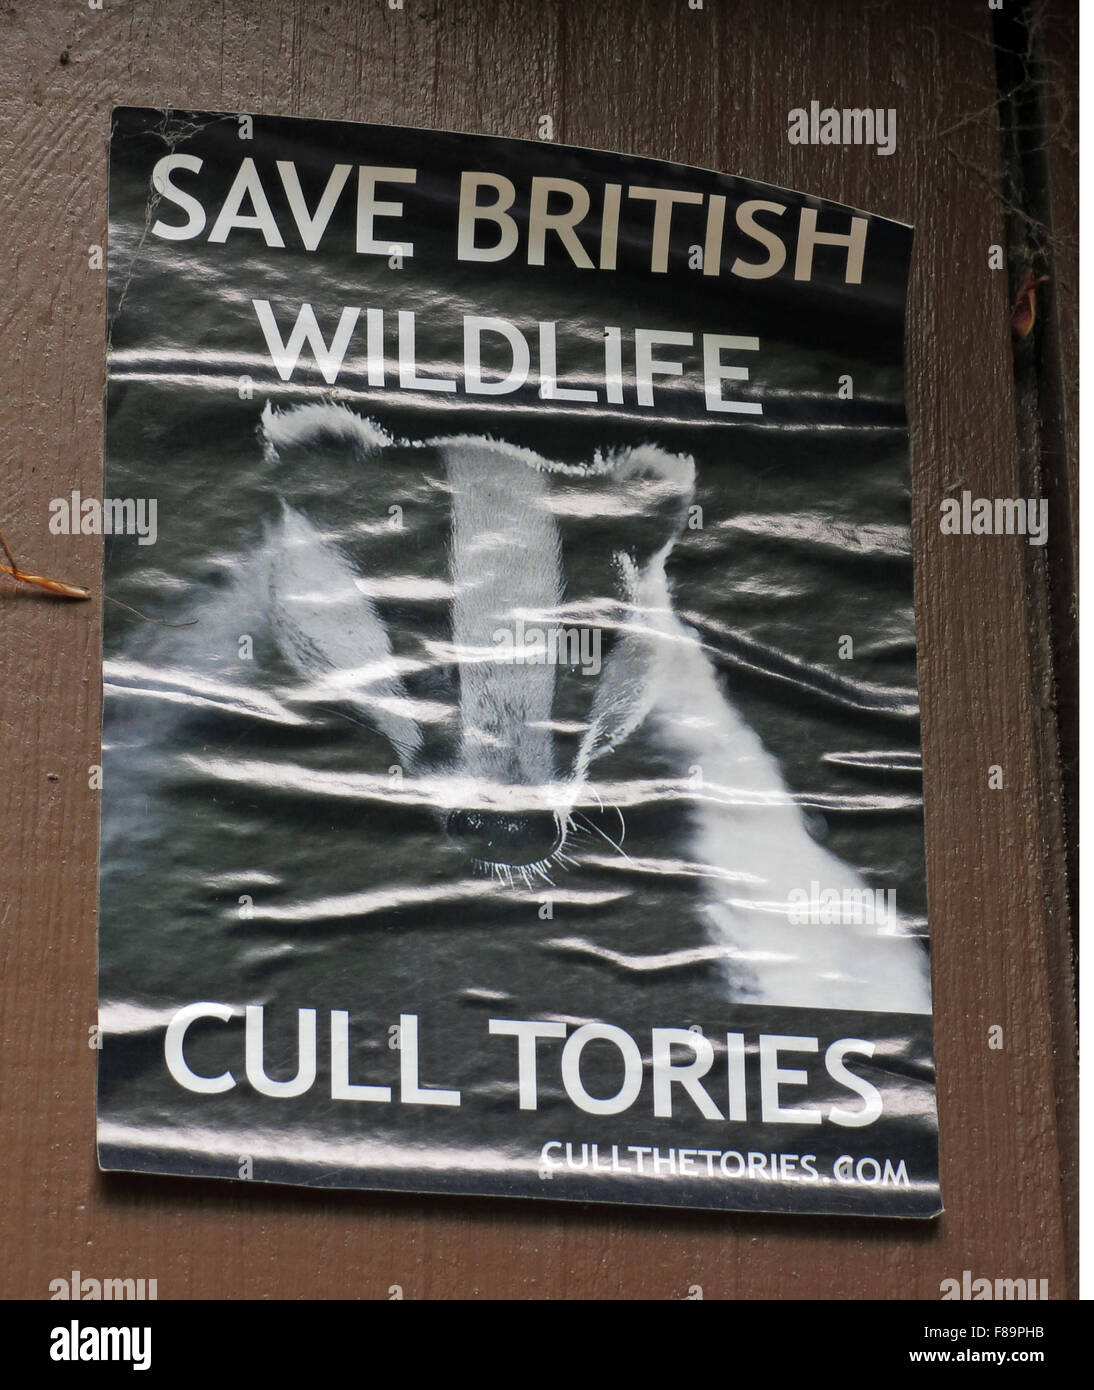 Save British Wildlife Poster,Walsall,West Midlands,Cull Tories, England, Regno Unito Foto Stock